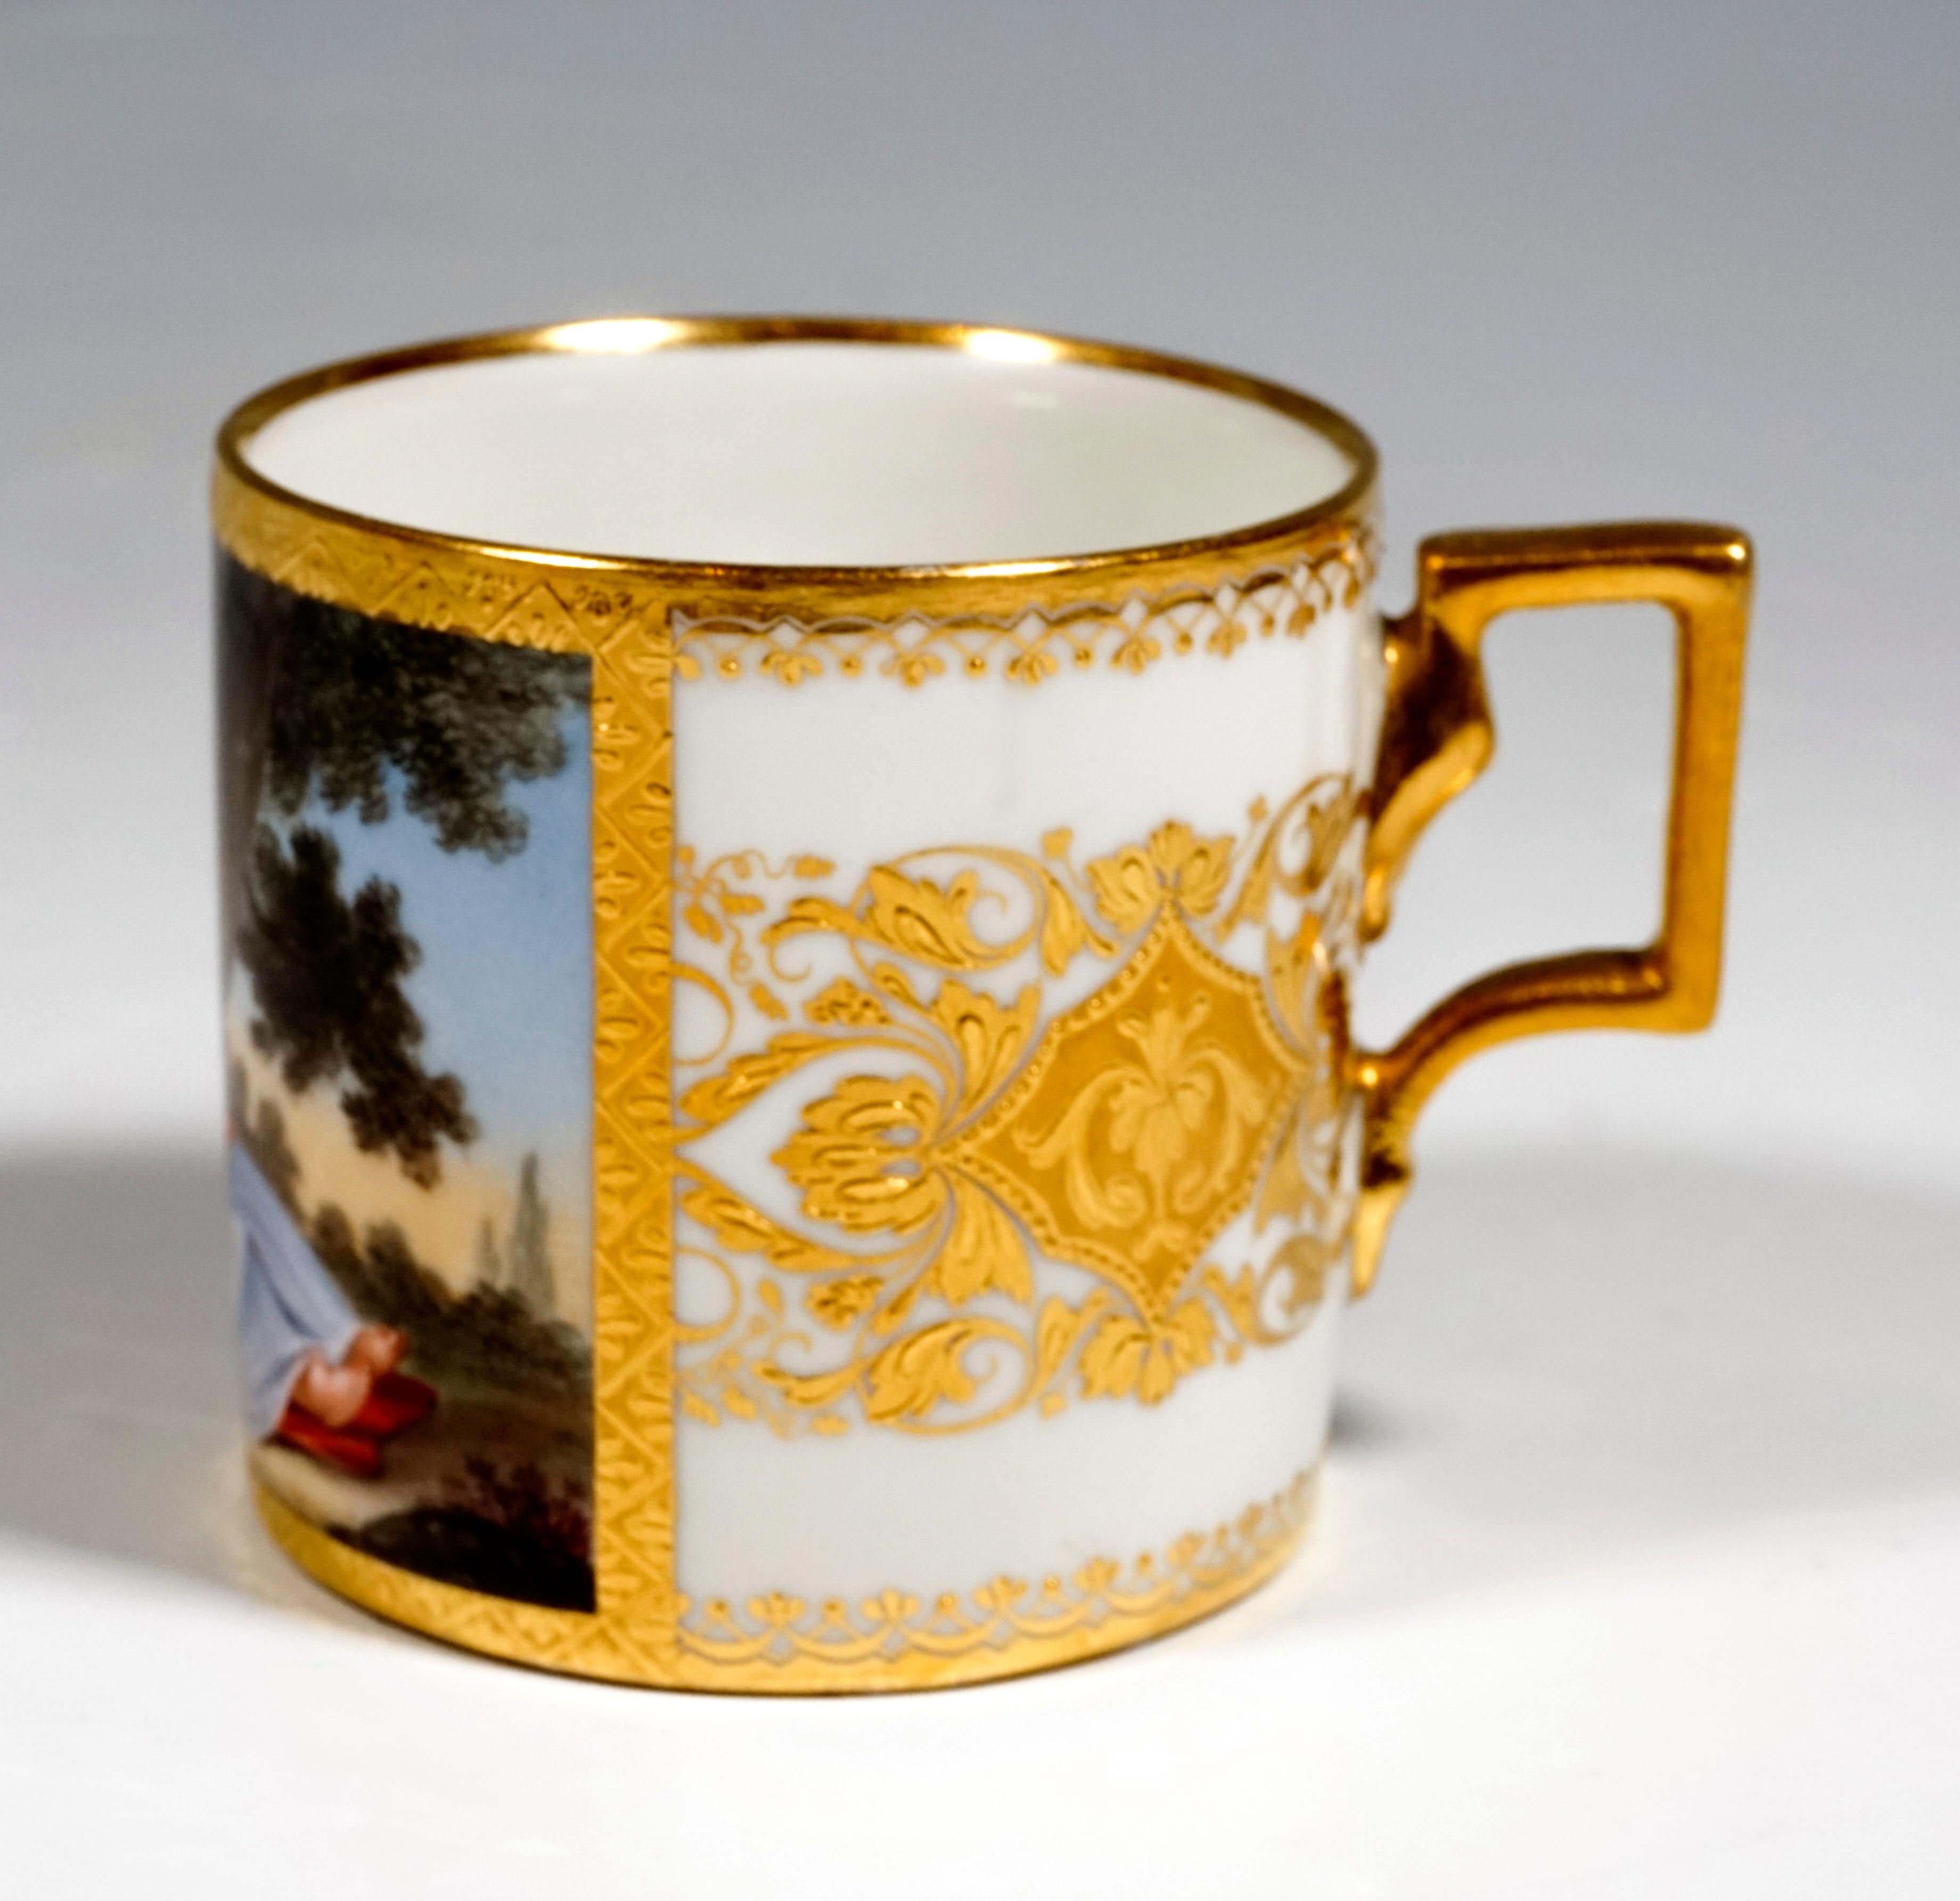 Hand-Crafted Viennese Imperial Porcelain Collecting Cup With Sleeping Girl, Sorgenthal, 1801